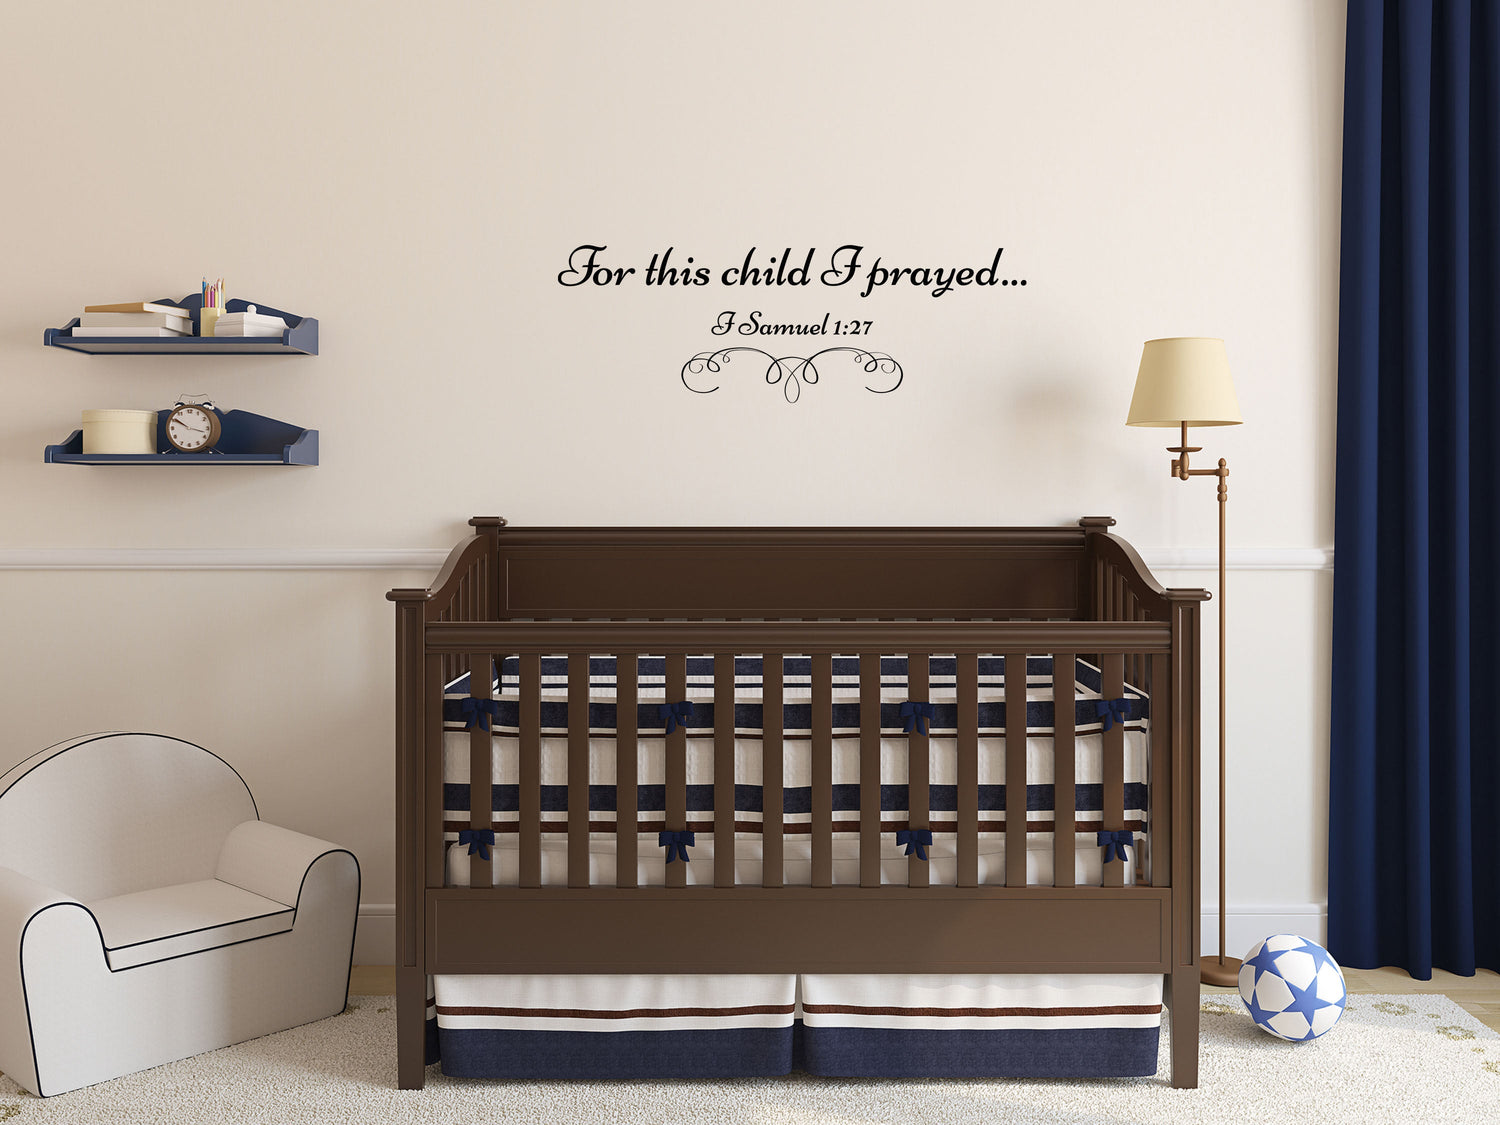 For This Child I Prayed - Inspirational Wall Decals Vinyl Wall Decal Done 